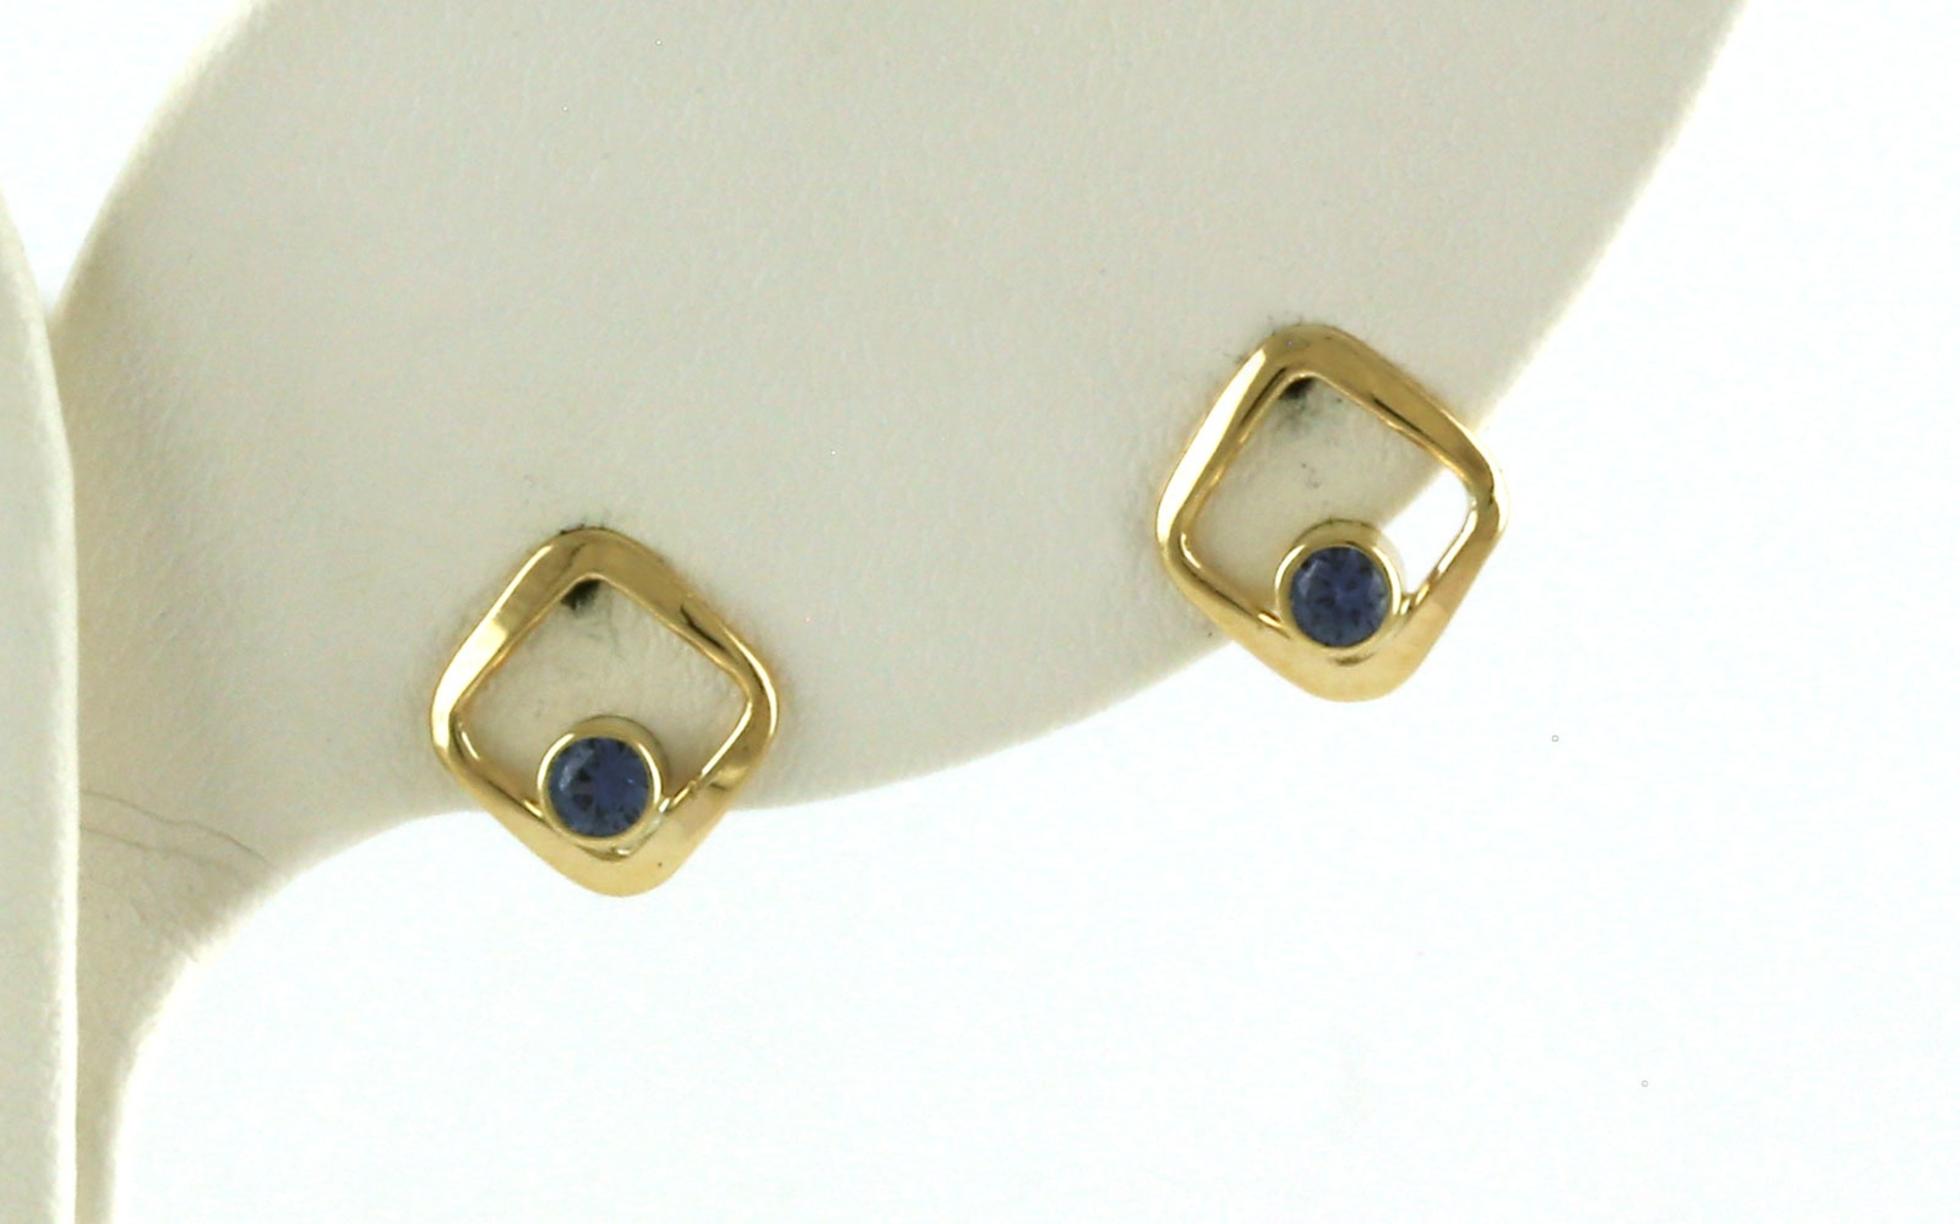 Square Bezel-set Montana Yogo Sapphire Stud Earrings in Yellow Gold (0.11cts TWT)